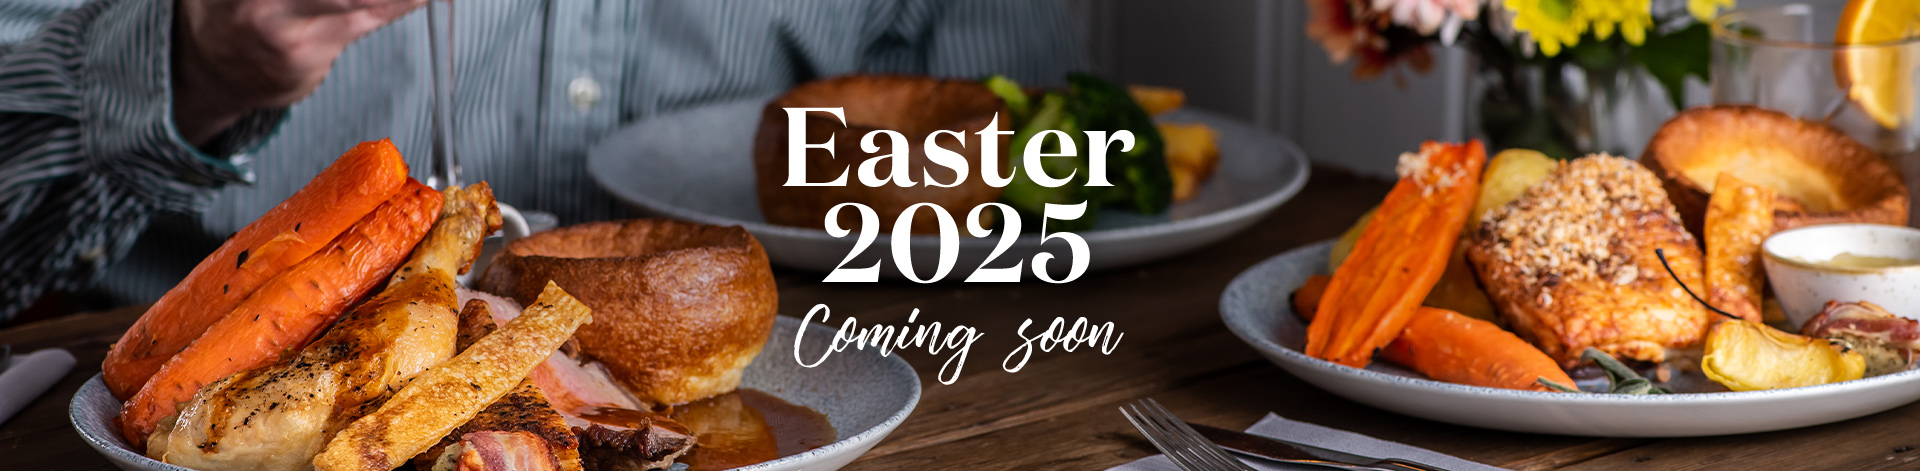 Easter at The Calverley Arms in Pudsey